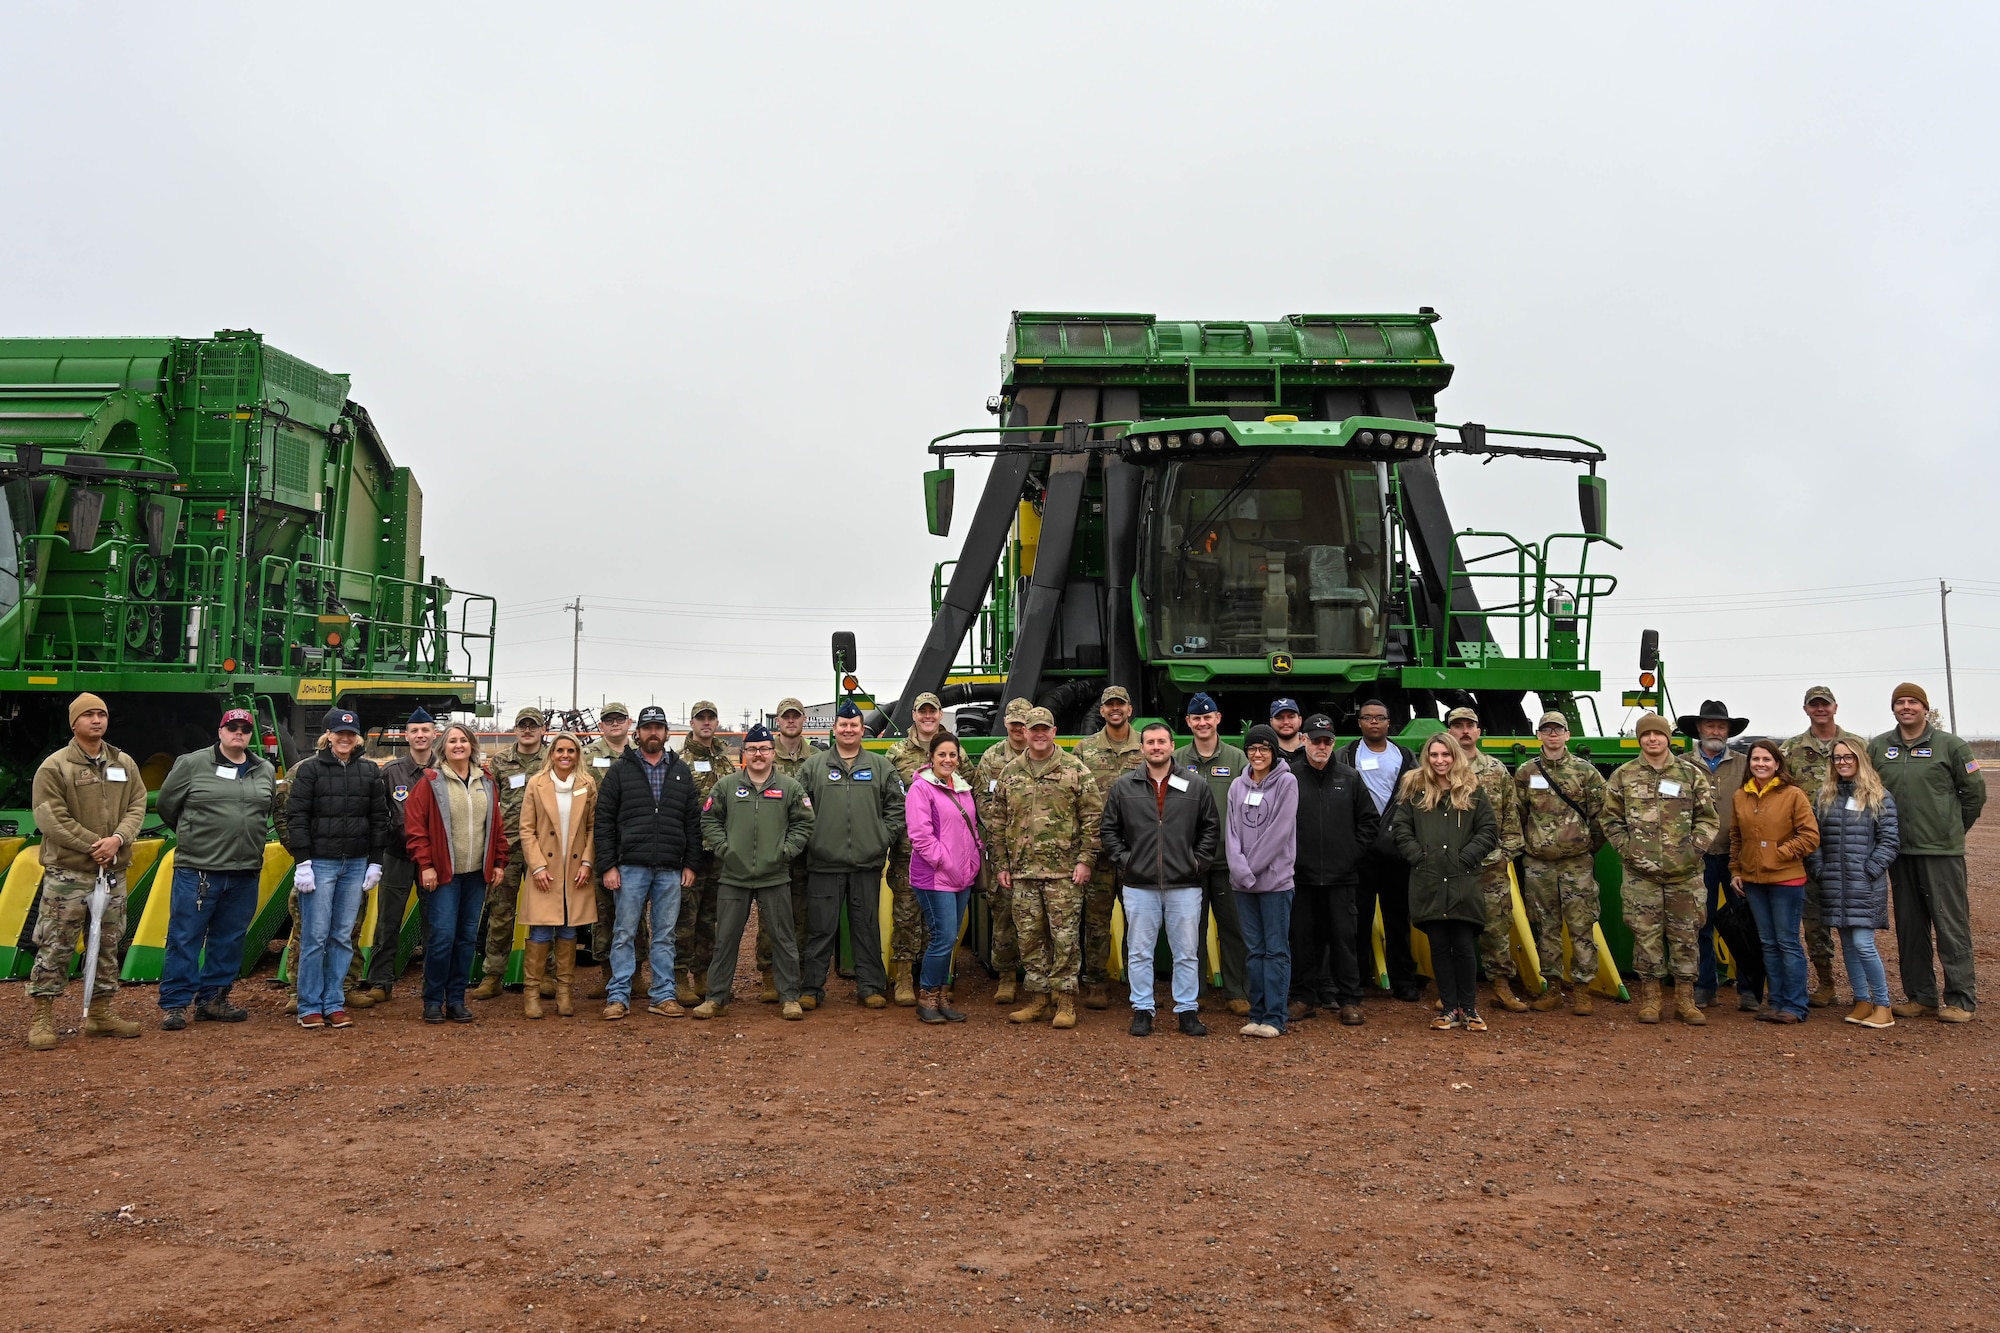 Airmen from the 97th Air Mobility Wing pose for a photo with local community members during an Airpower and Agriculture tour in Altus, Oklahoma, Nov. 30, 2023. This tour, formerly known as “Farm City Week,” was renamed “Airpower and Agriculture” to better reflect the mission and intent of the event, giving Airmen an opportunity to gain an understanding of the local agricultural community, and for the local agricultural community to get a better understanding of the mission at Altus AFB. (U.S. Air Force photo by Senior Airman Trenton Jancze)